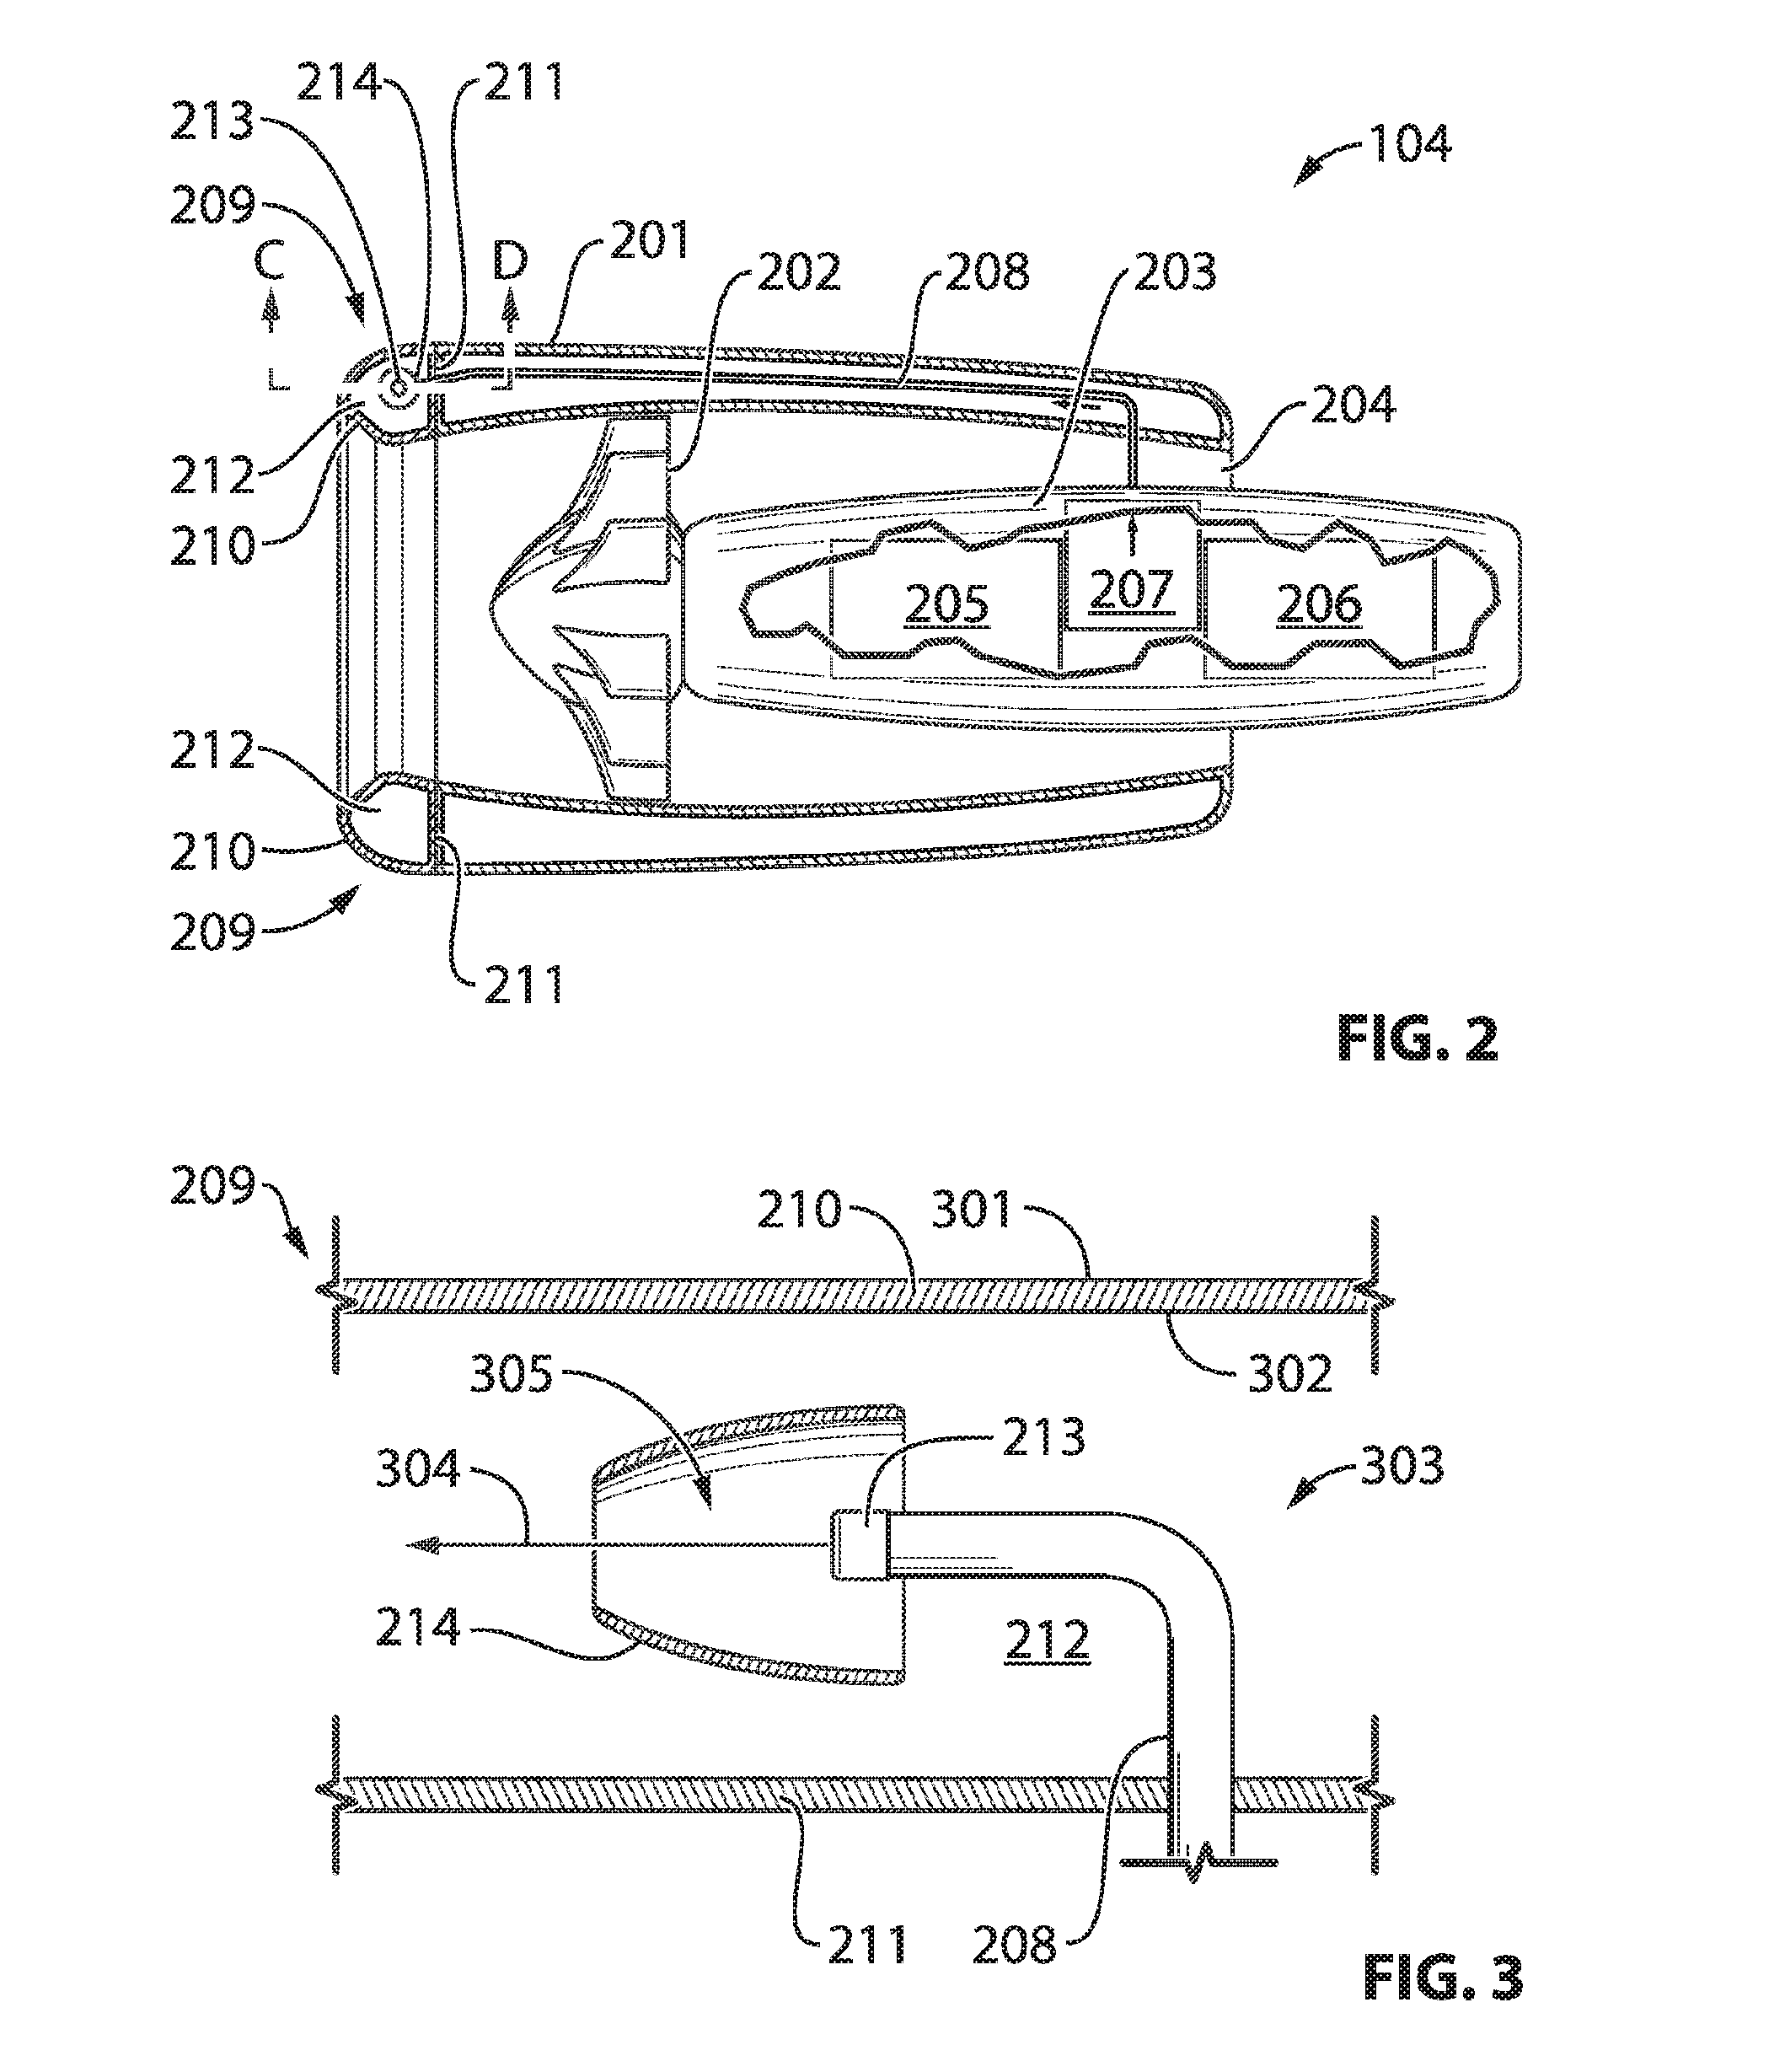 Anti-icing system for an aircraft